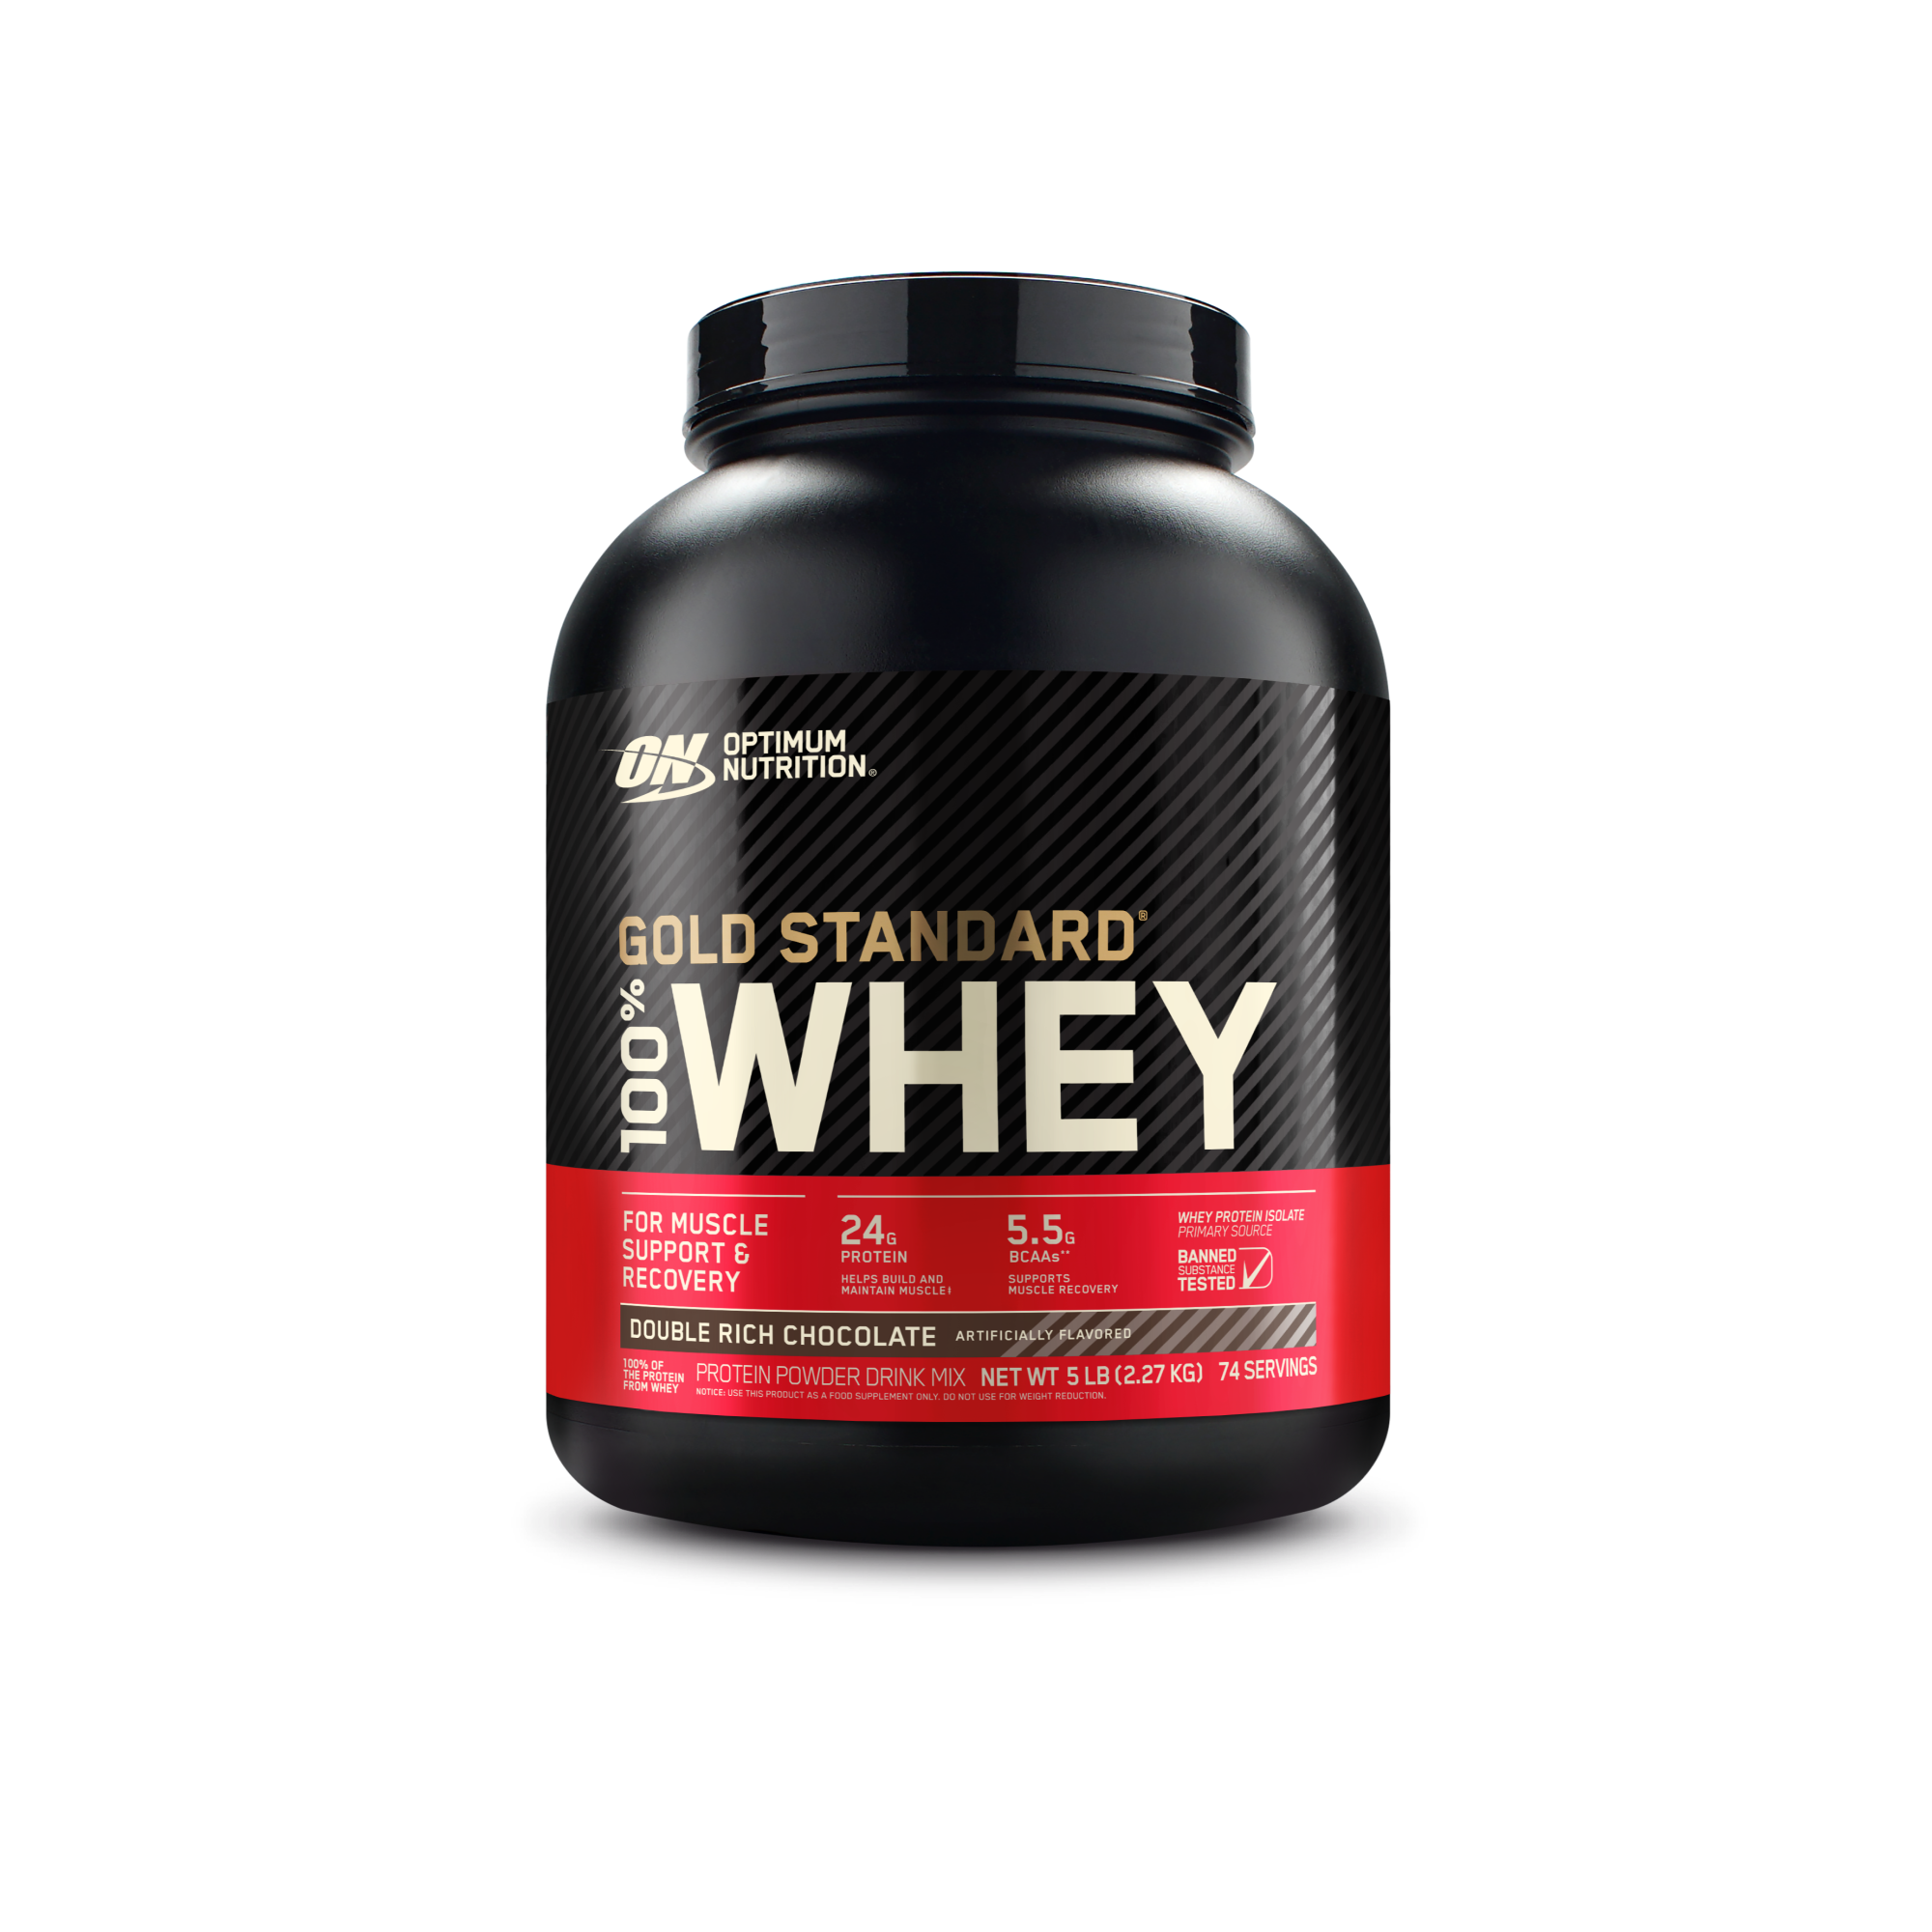 https://content.optimumnutrition.com/i/on/on-gold-standard-100-whey-protein_Image_01?$TTL_PRODUCT_IMAGES$&locale=en-us,en-gb,*